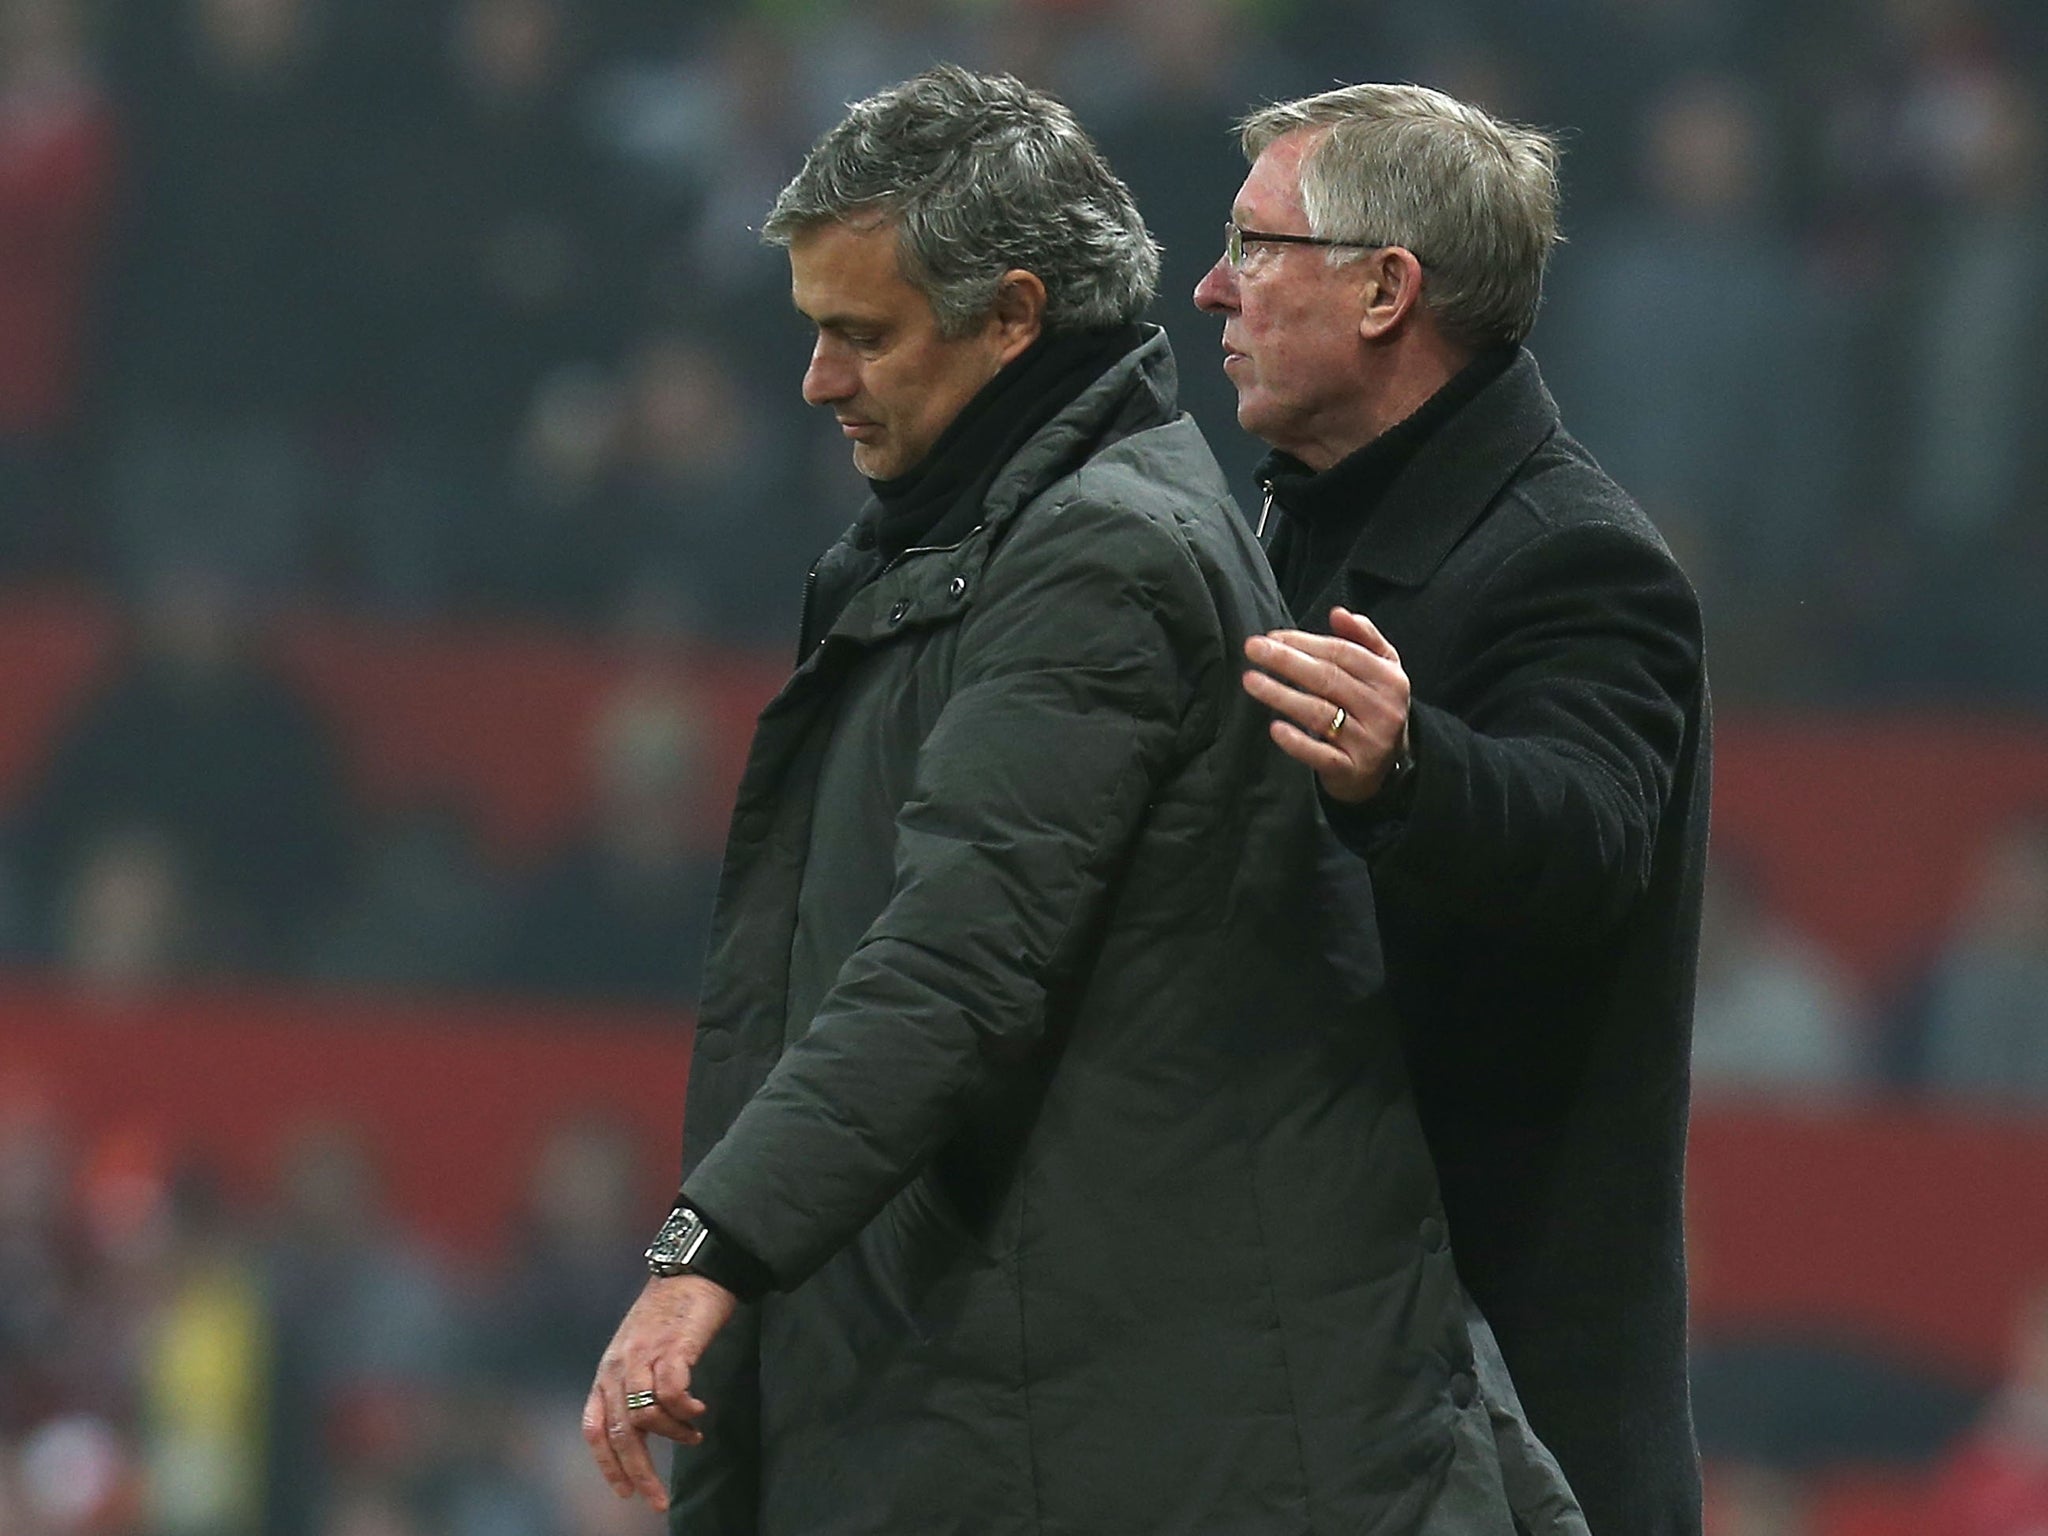 Jose Moruinho feels Manchester United fans are wrong to blame Sir Alex Ferguson for the side's failings this season